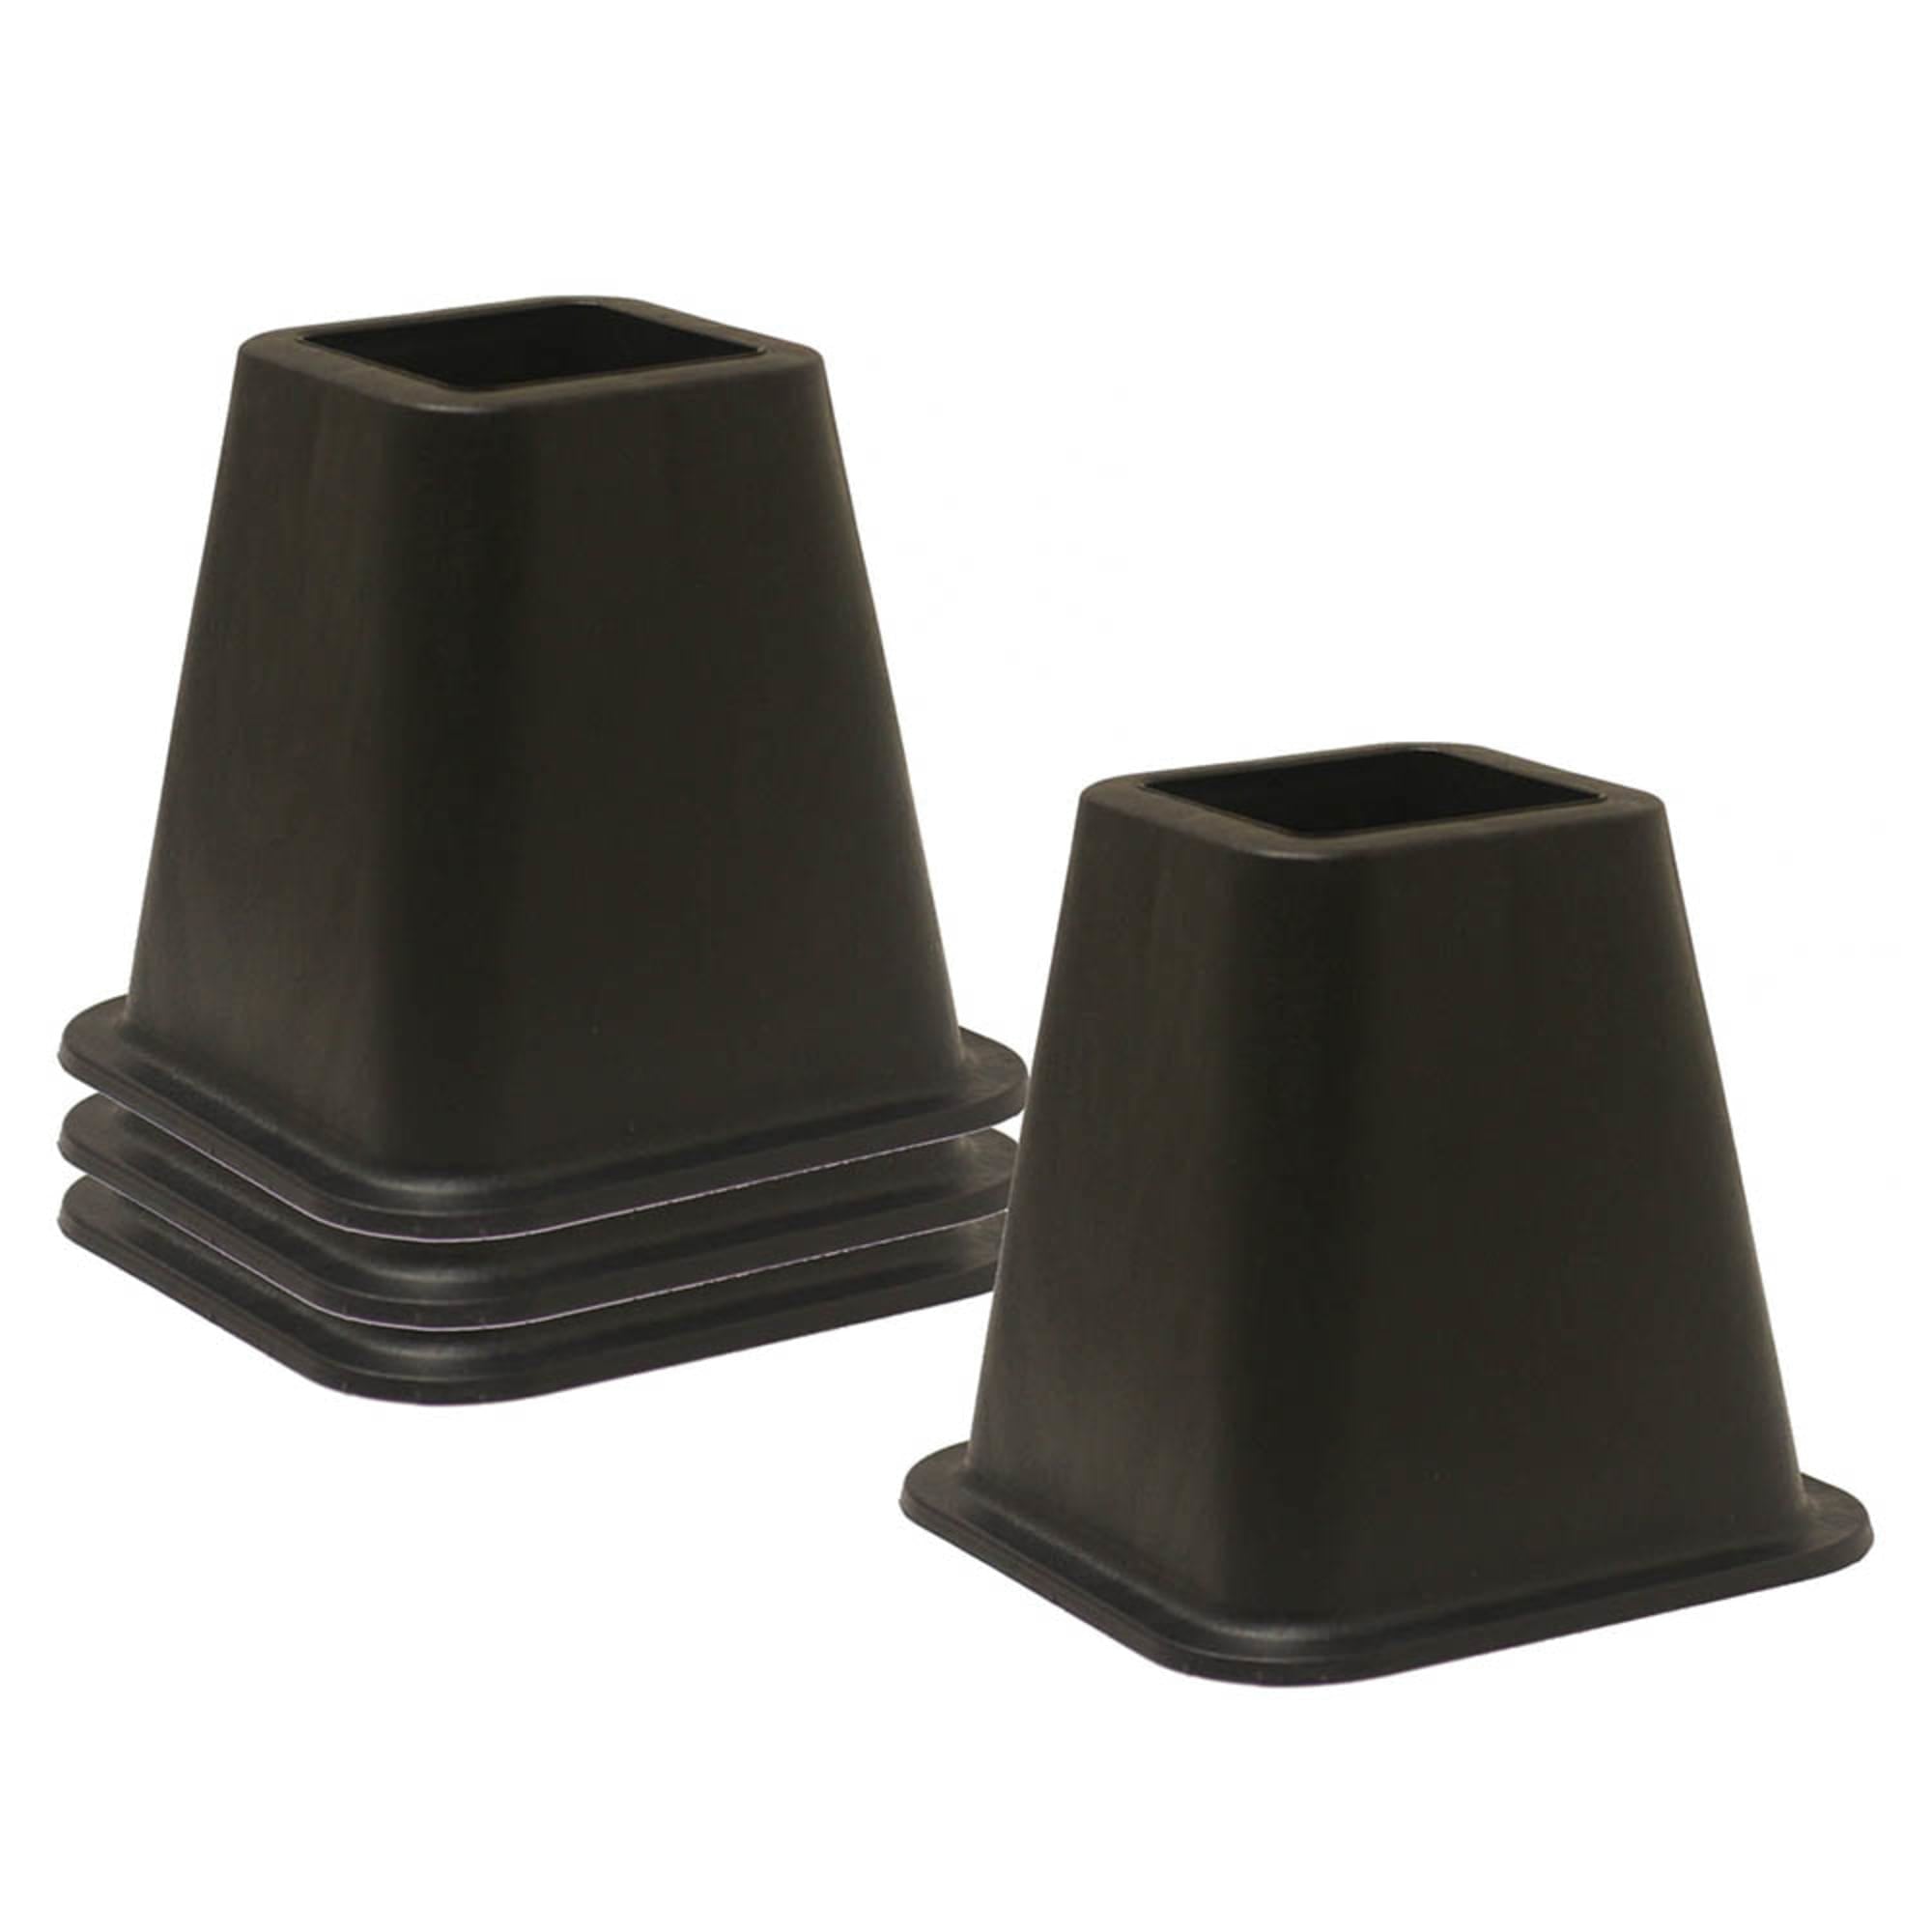 Home Basics 4 Piece Plastic Bed Risers, Black $6.00 EACH, CASE PACK OF 12